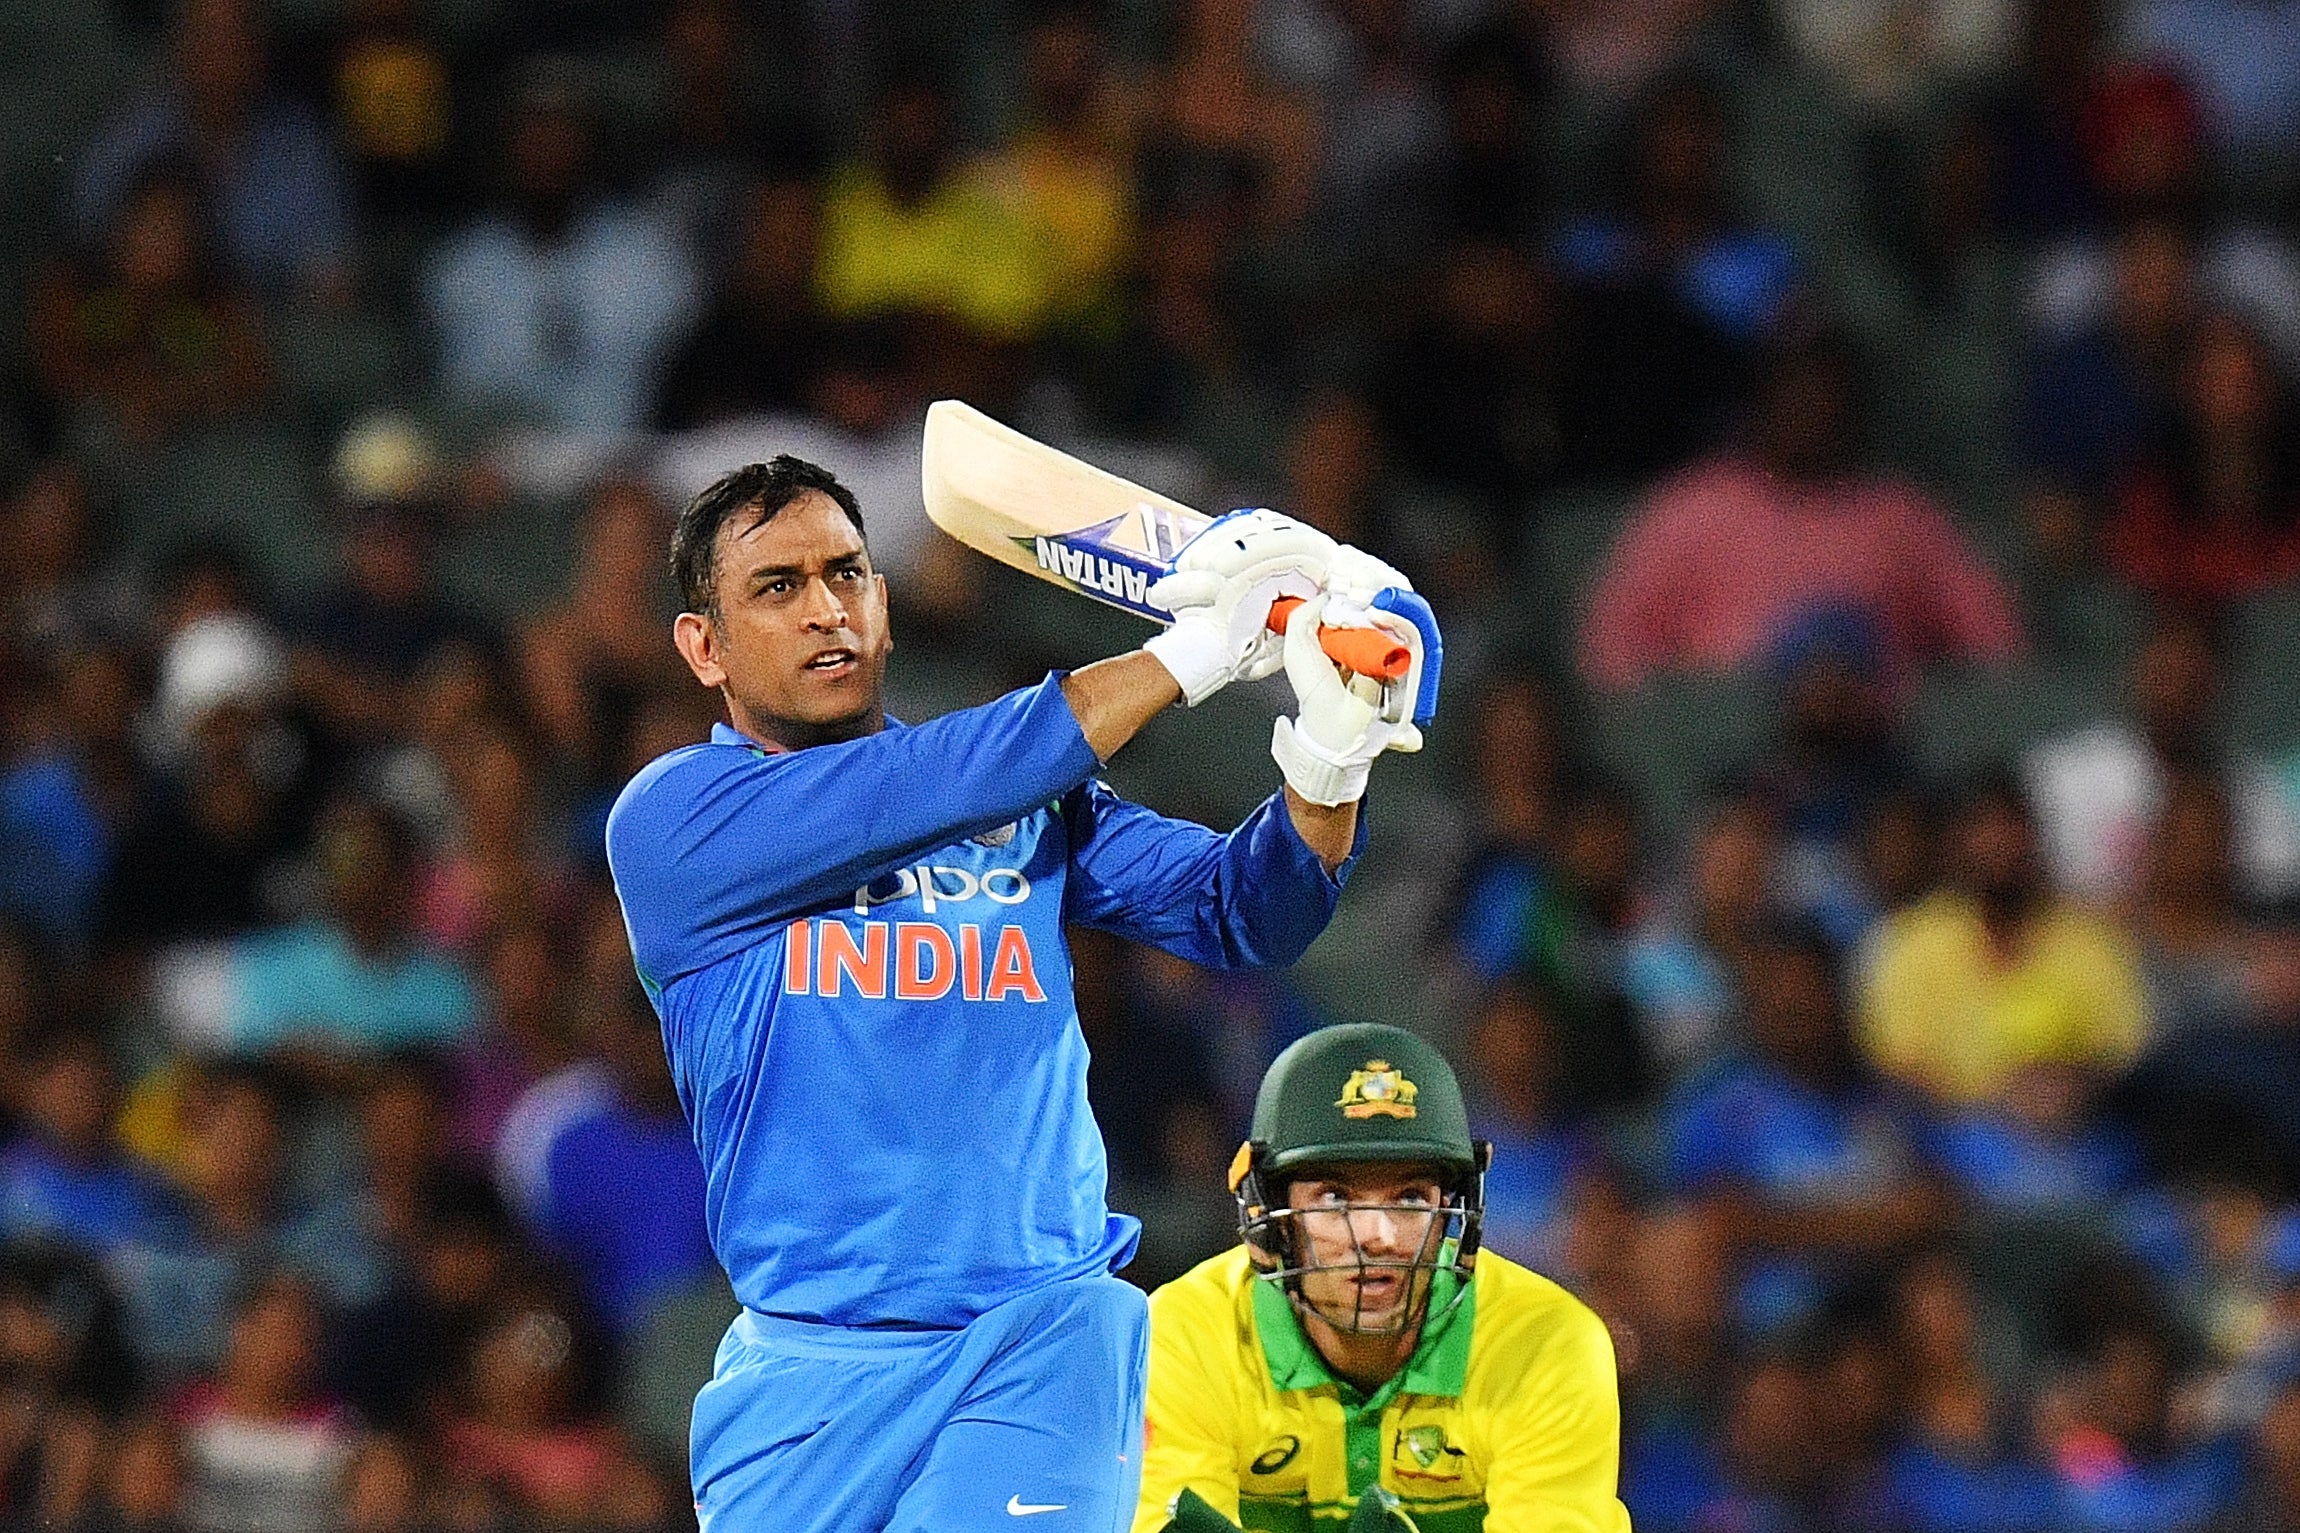 MS Dhoni whipped off his helmet and led India to victory in Adelaide, even as his nation doubted him